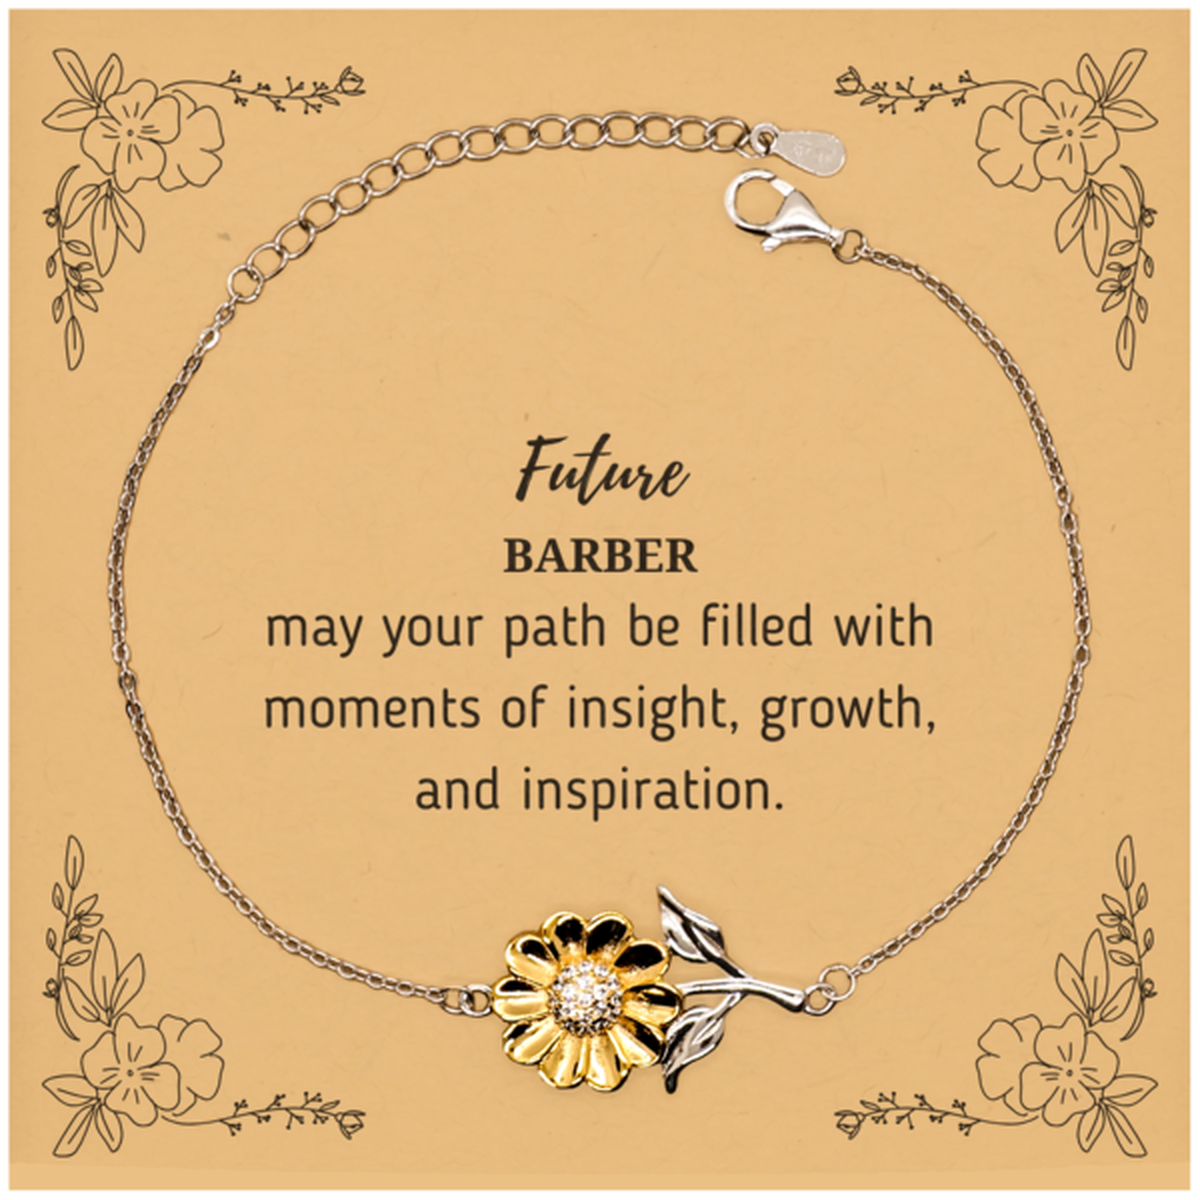 Future Barber Gifts, May your path be filled with moments of insight, Graduation Gifts for New Barber, Christmas Unique Sunflower Bracelet For Men, Women, Friends